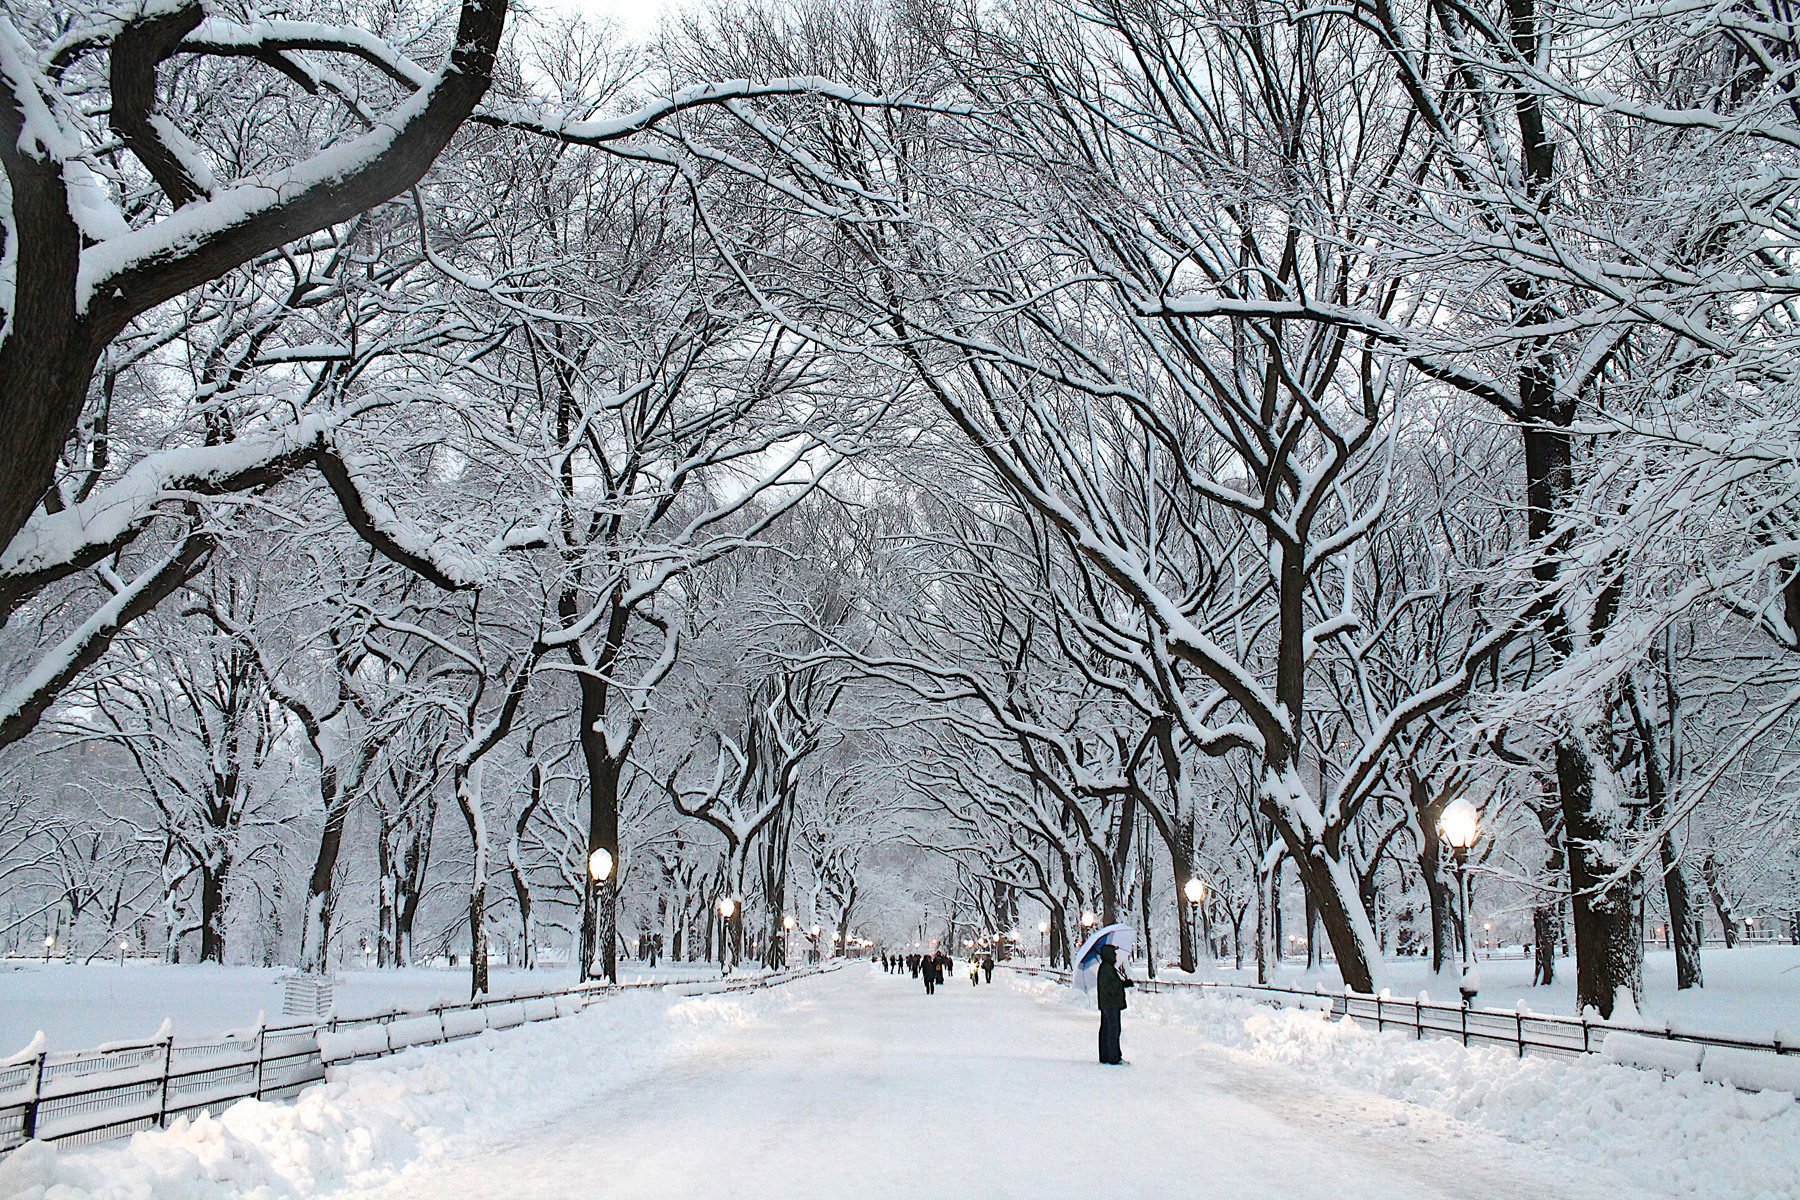 Places for Great Snow Photos - Central Park in the Winter // Notjessfashion.com